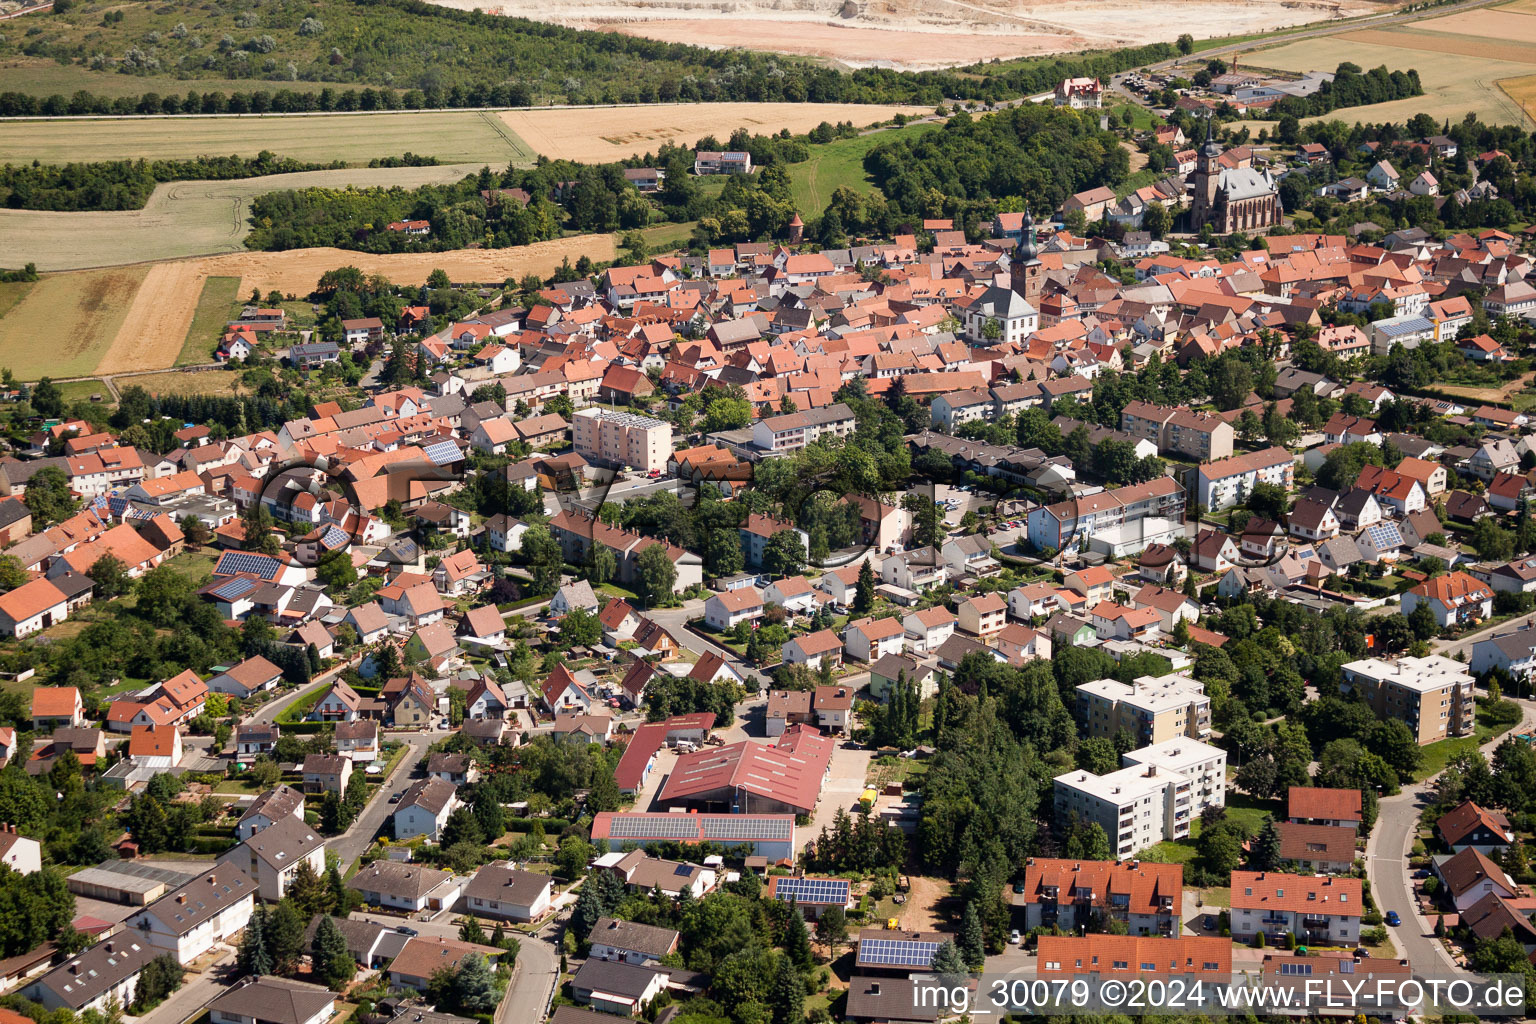 Town View of the streets and houses of the residential areas in Goellheim in the state Rhineland-Palatinate, Germany